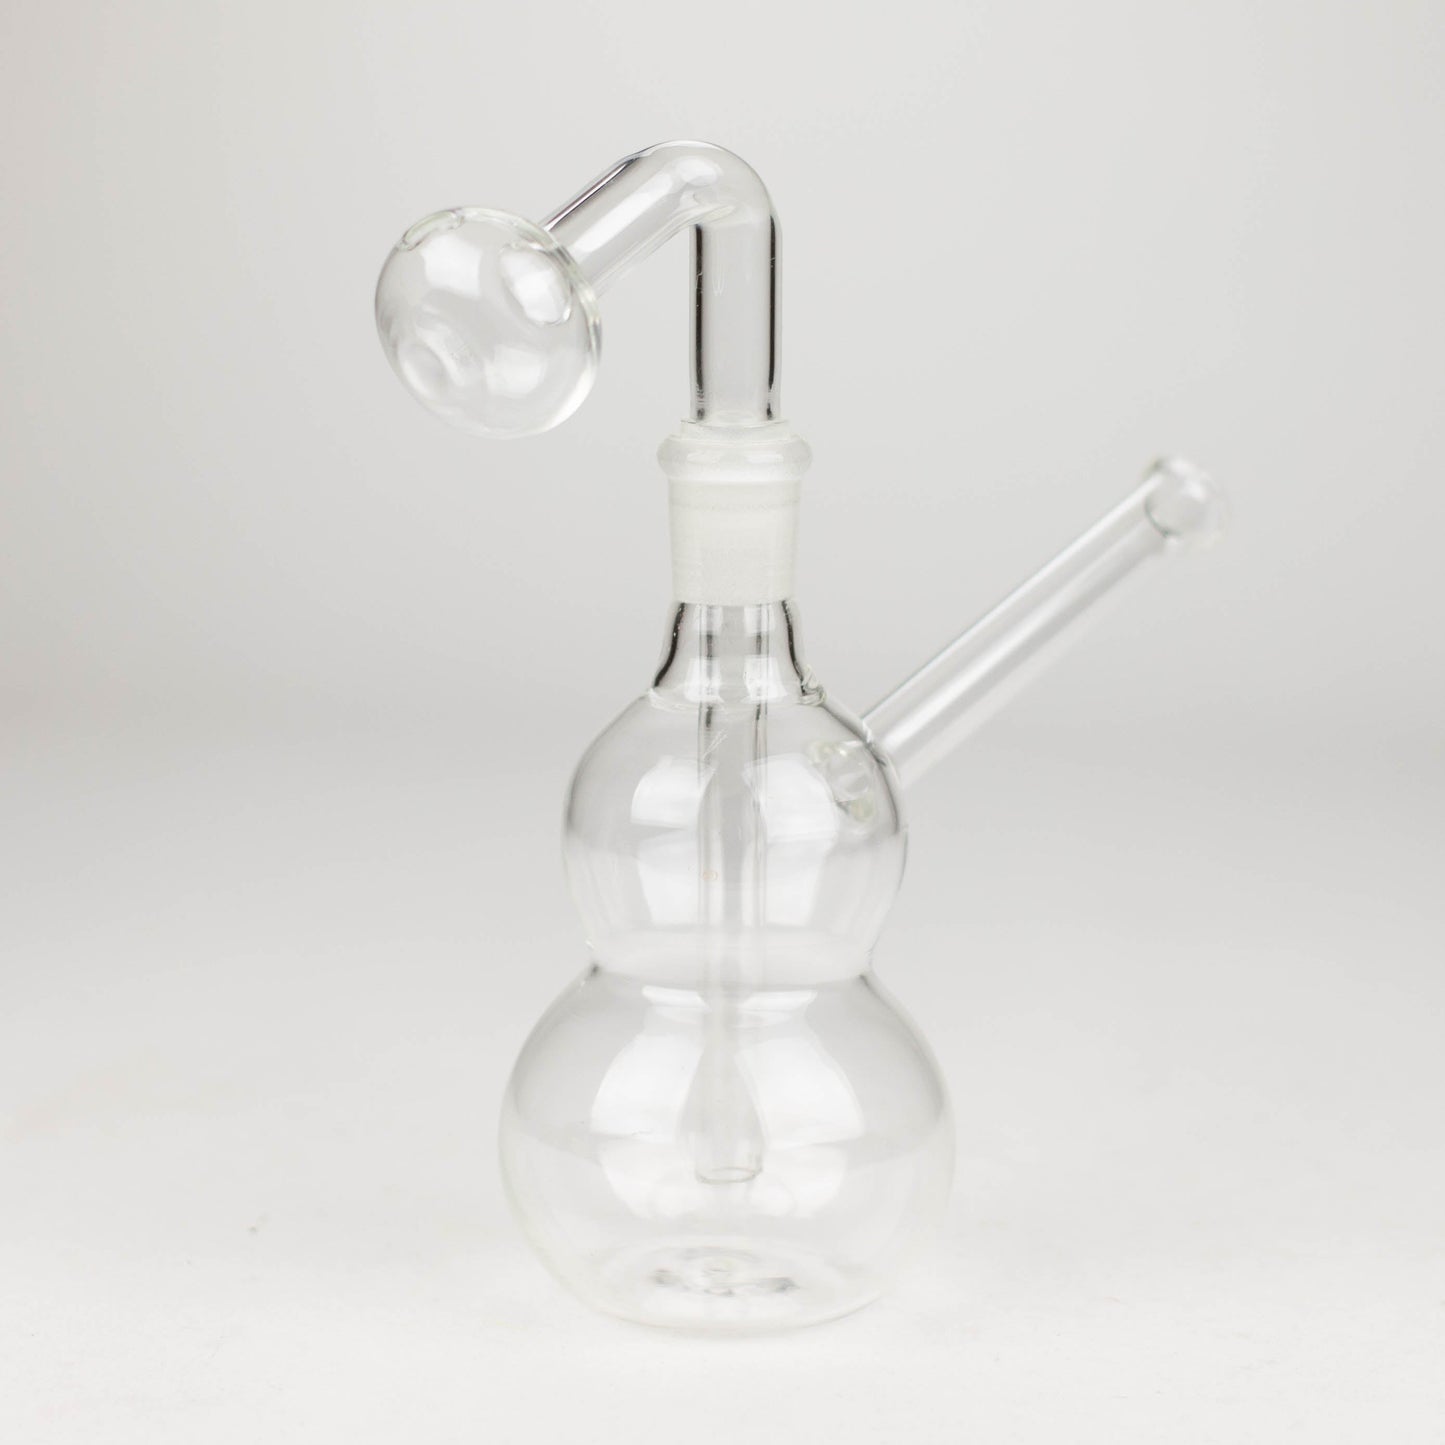 6" glass oil rig_2